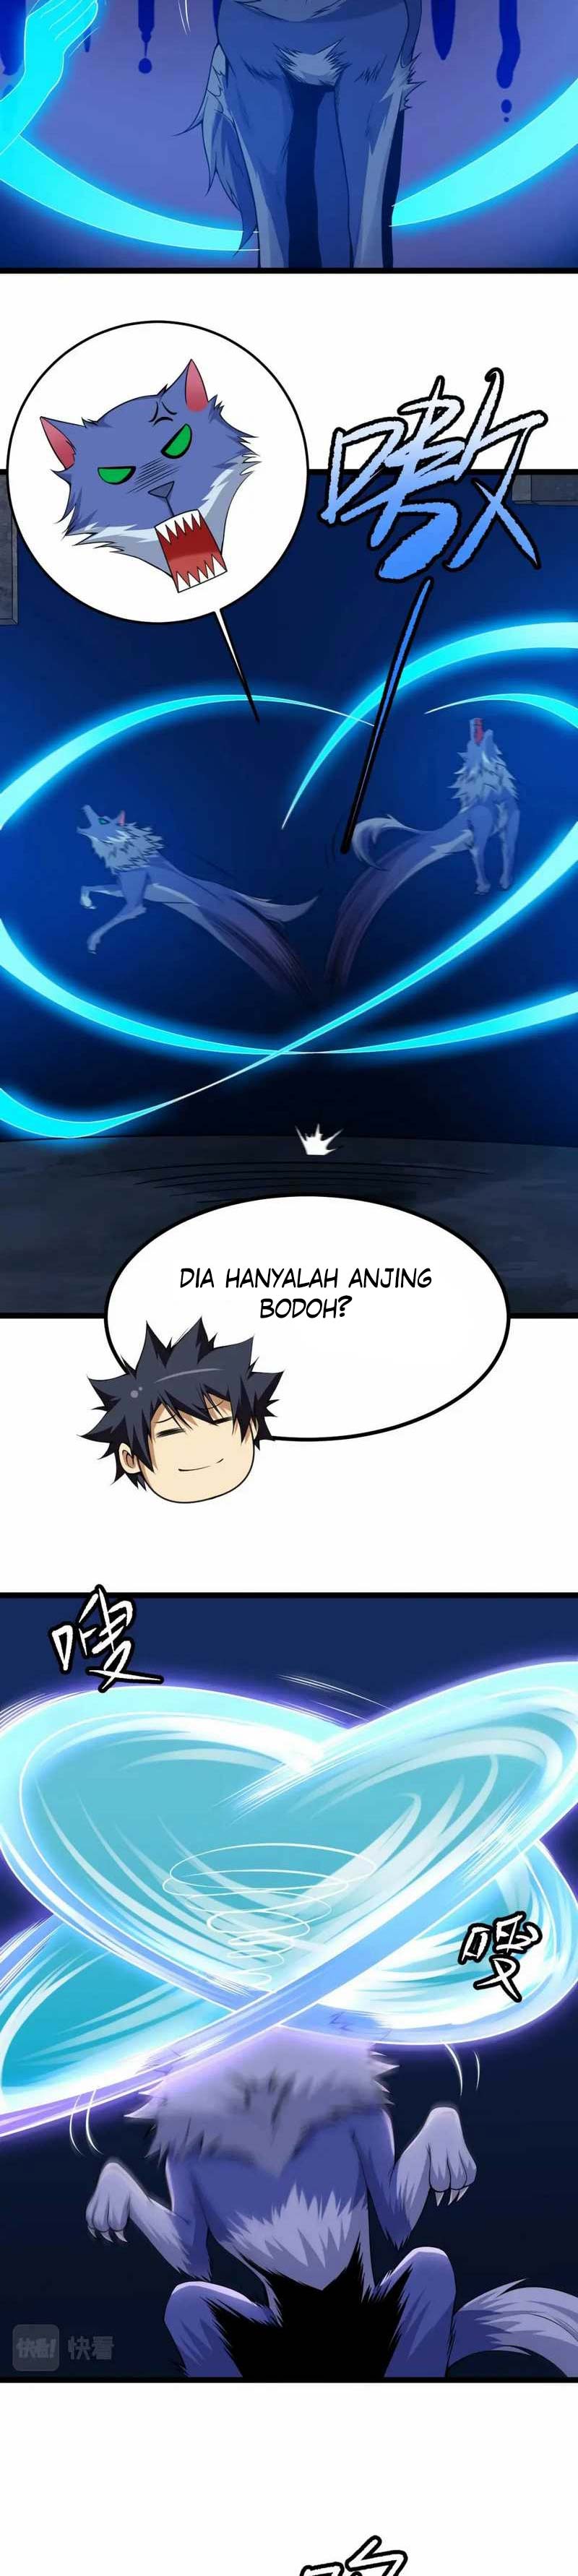 Dilarang COPAS - situs resmi www.mangacanblog.com - Komik i just want to be beaten to death by everyone 117 - chapter 117 118 Indonesia i just want to be beaten to death by everyone 117 - chapter 117 Terbaru 6|Baca Manga Komik Indonesia|Mangacan